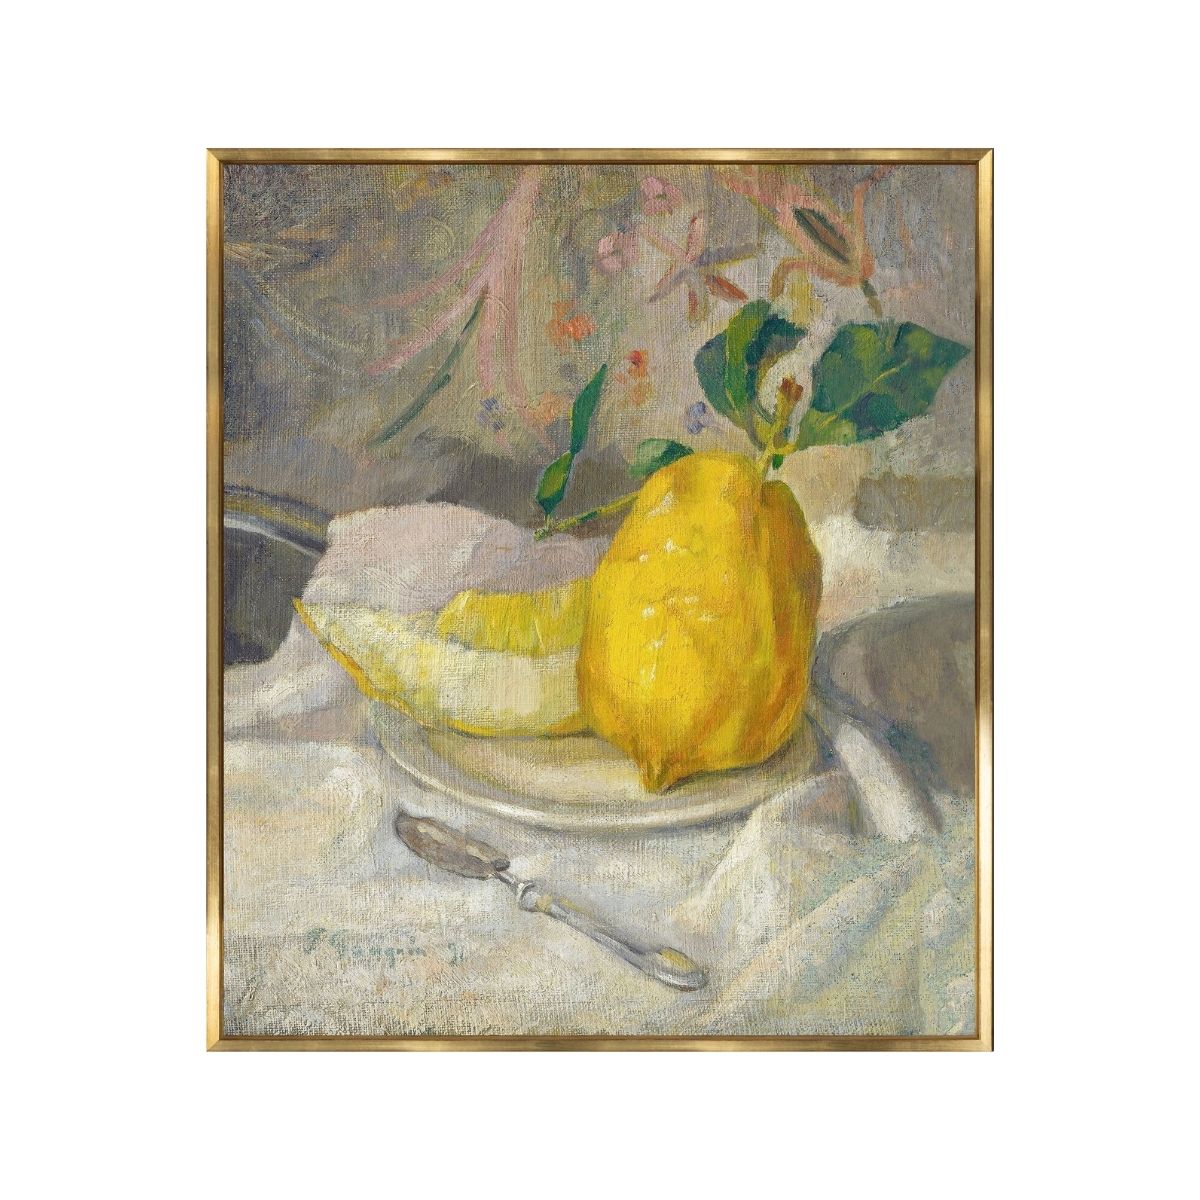 Melon and Lemon centred on a white tablecloth. Artwork in a golden frame. Post-impressionist art style. Front view.